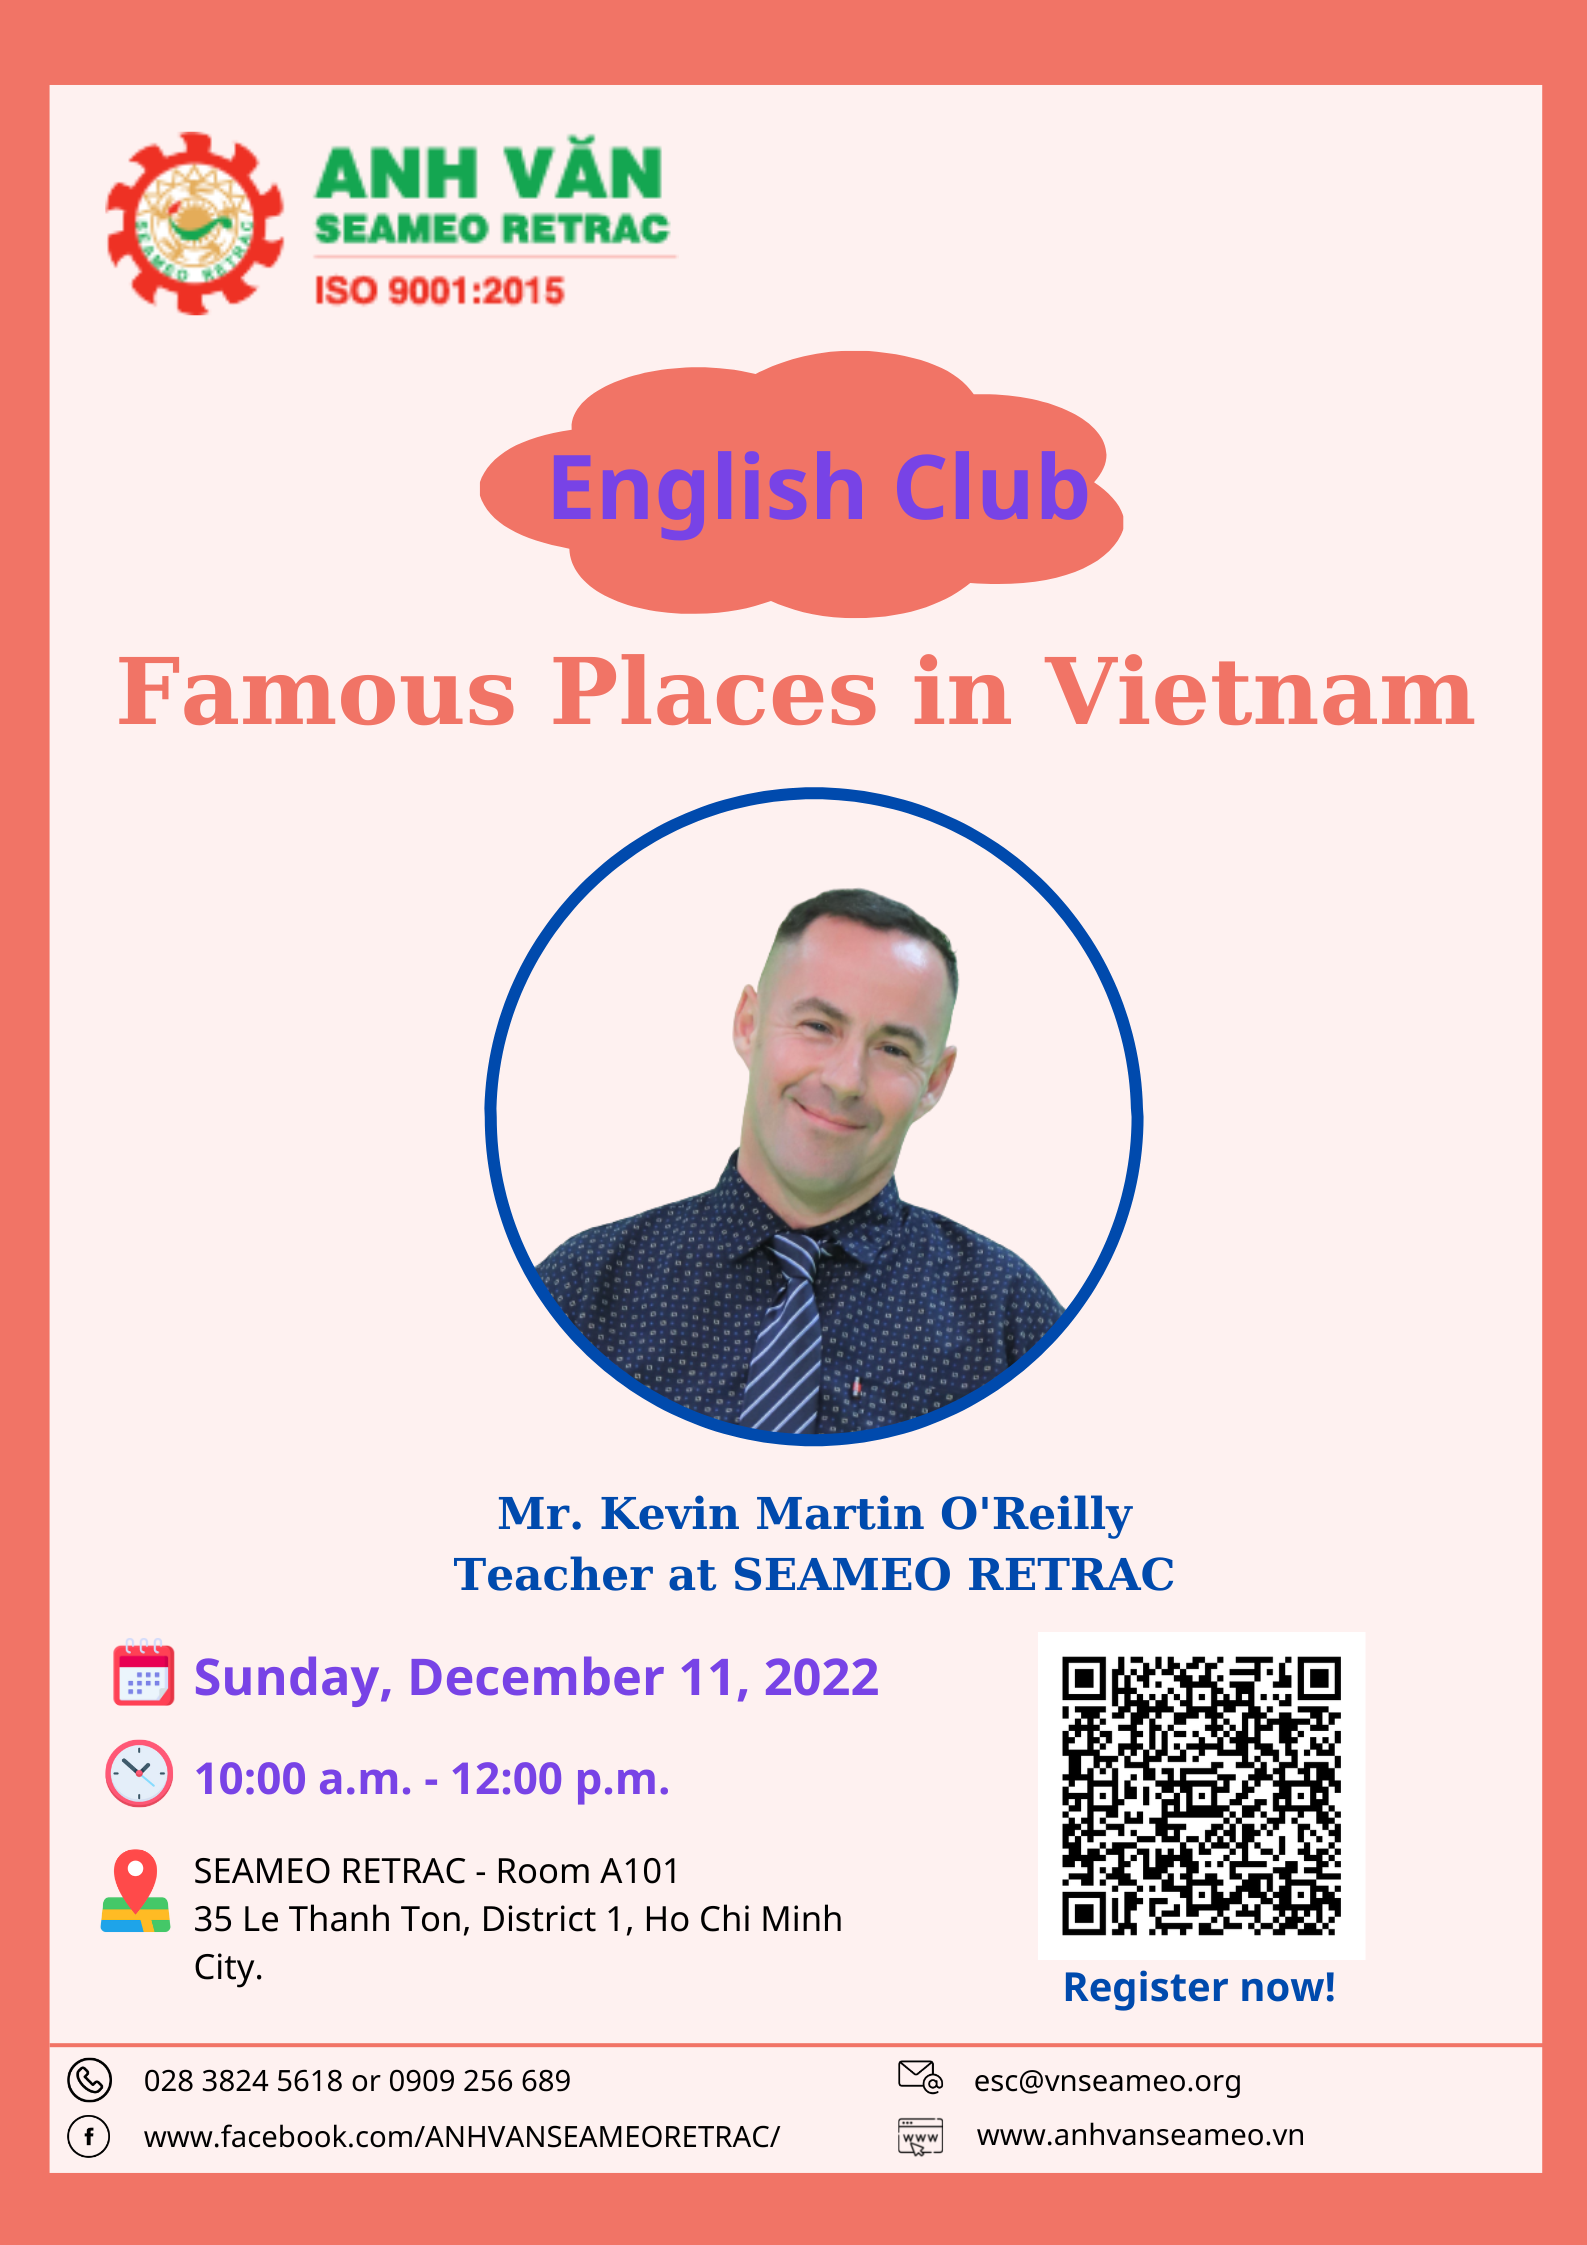 English club titled “Famous Places in Vietnam”